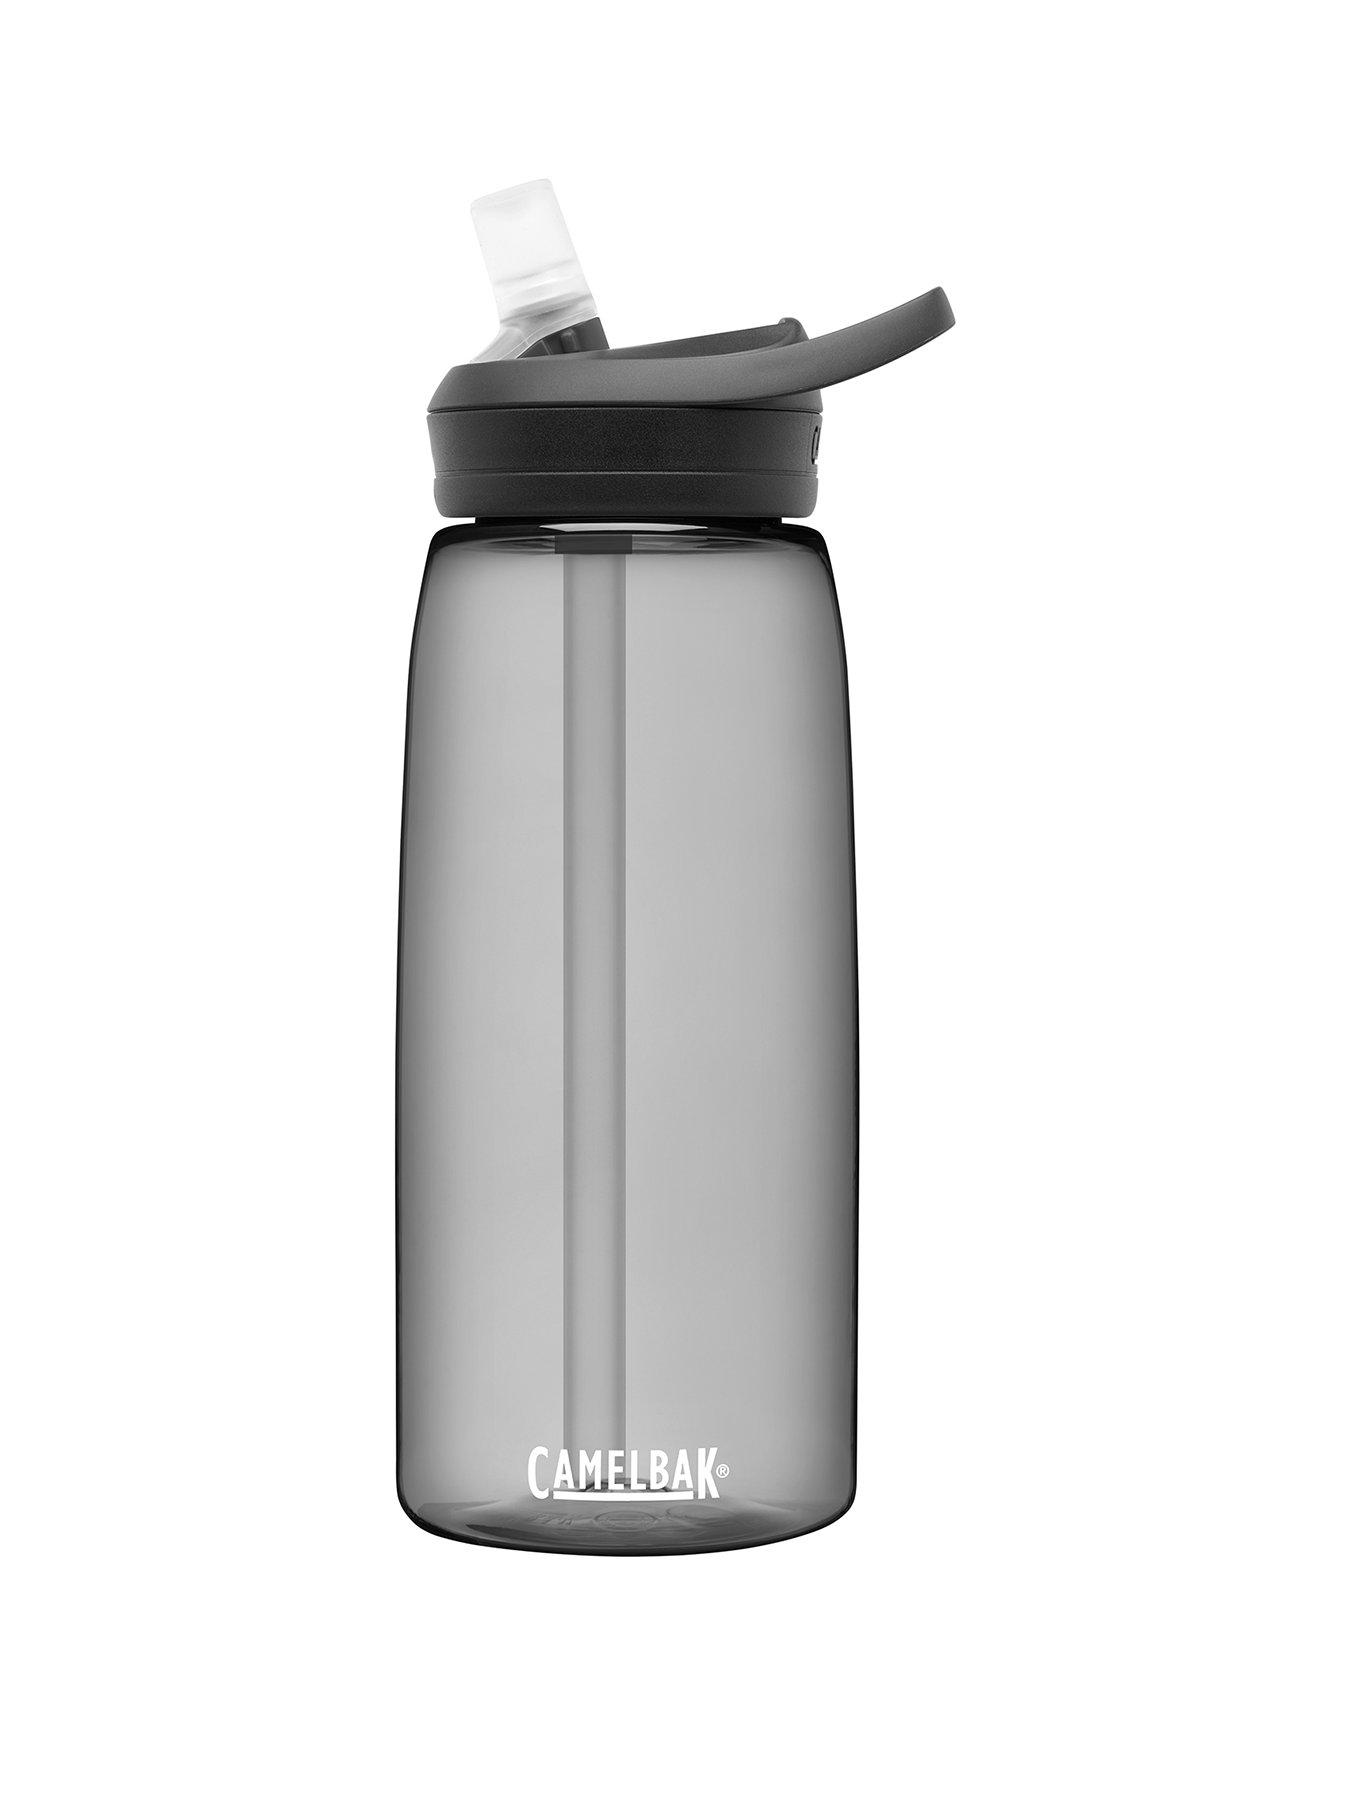 CHILLOUT LIFE Stainless Steel 16 oz Vacuum Insulated Coffee Mug  with Handle and Lid, Large Thermal Camping Coffee Mug Cup with Durable  Sliding Lid for Men & Women, Keeps your